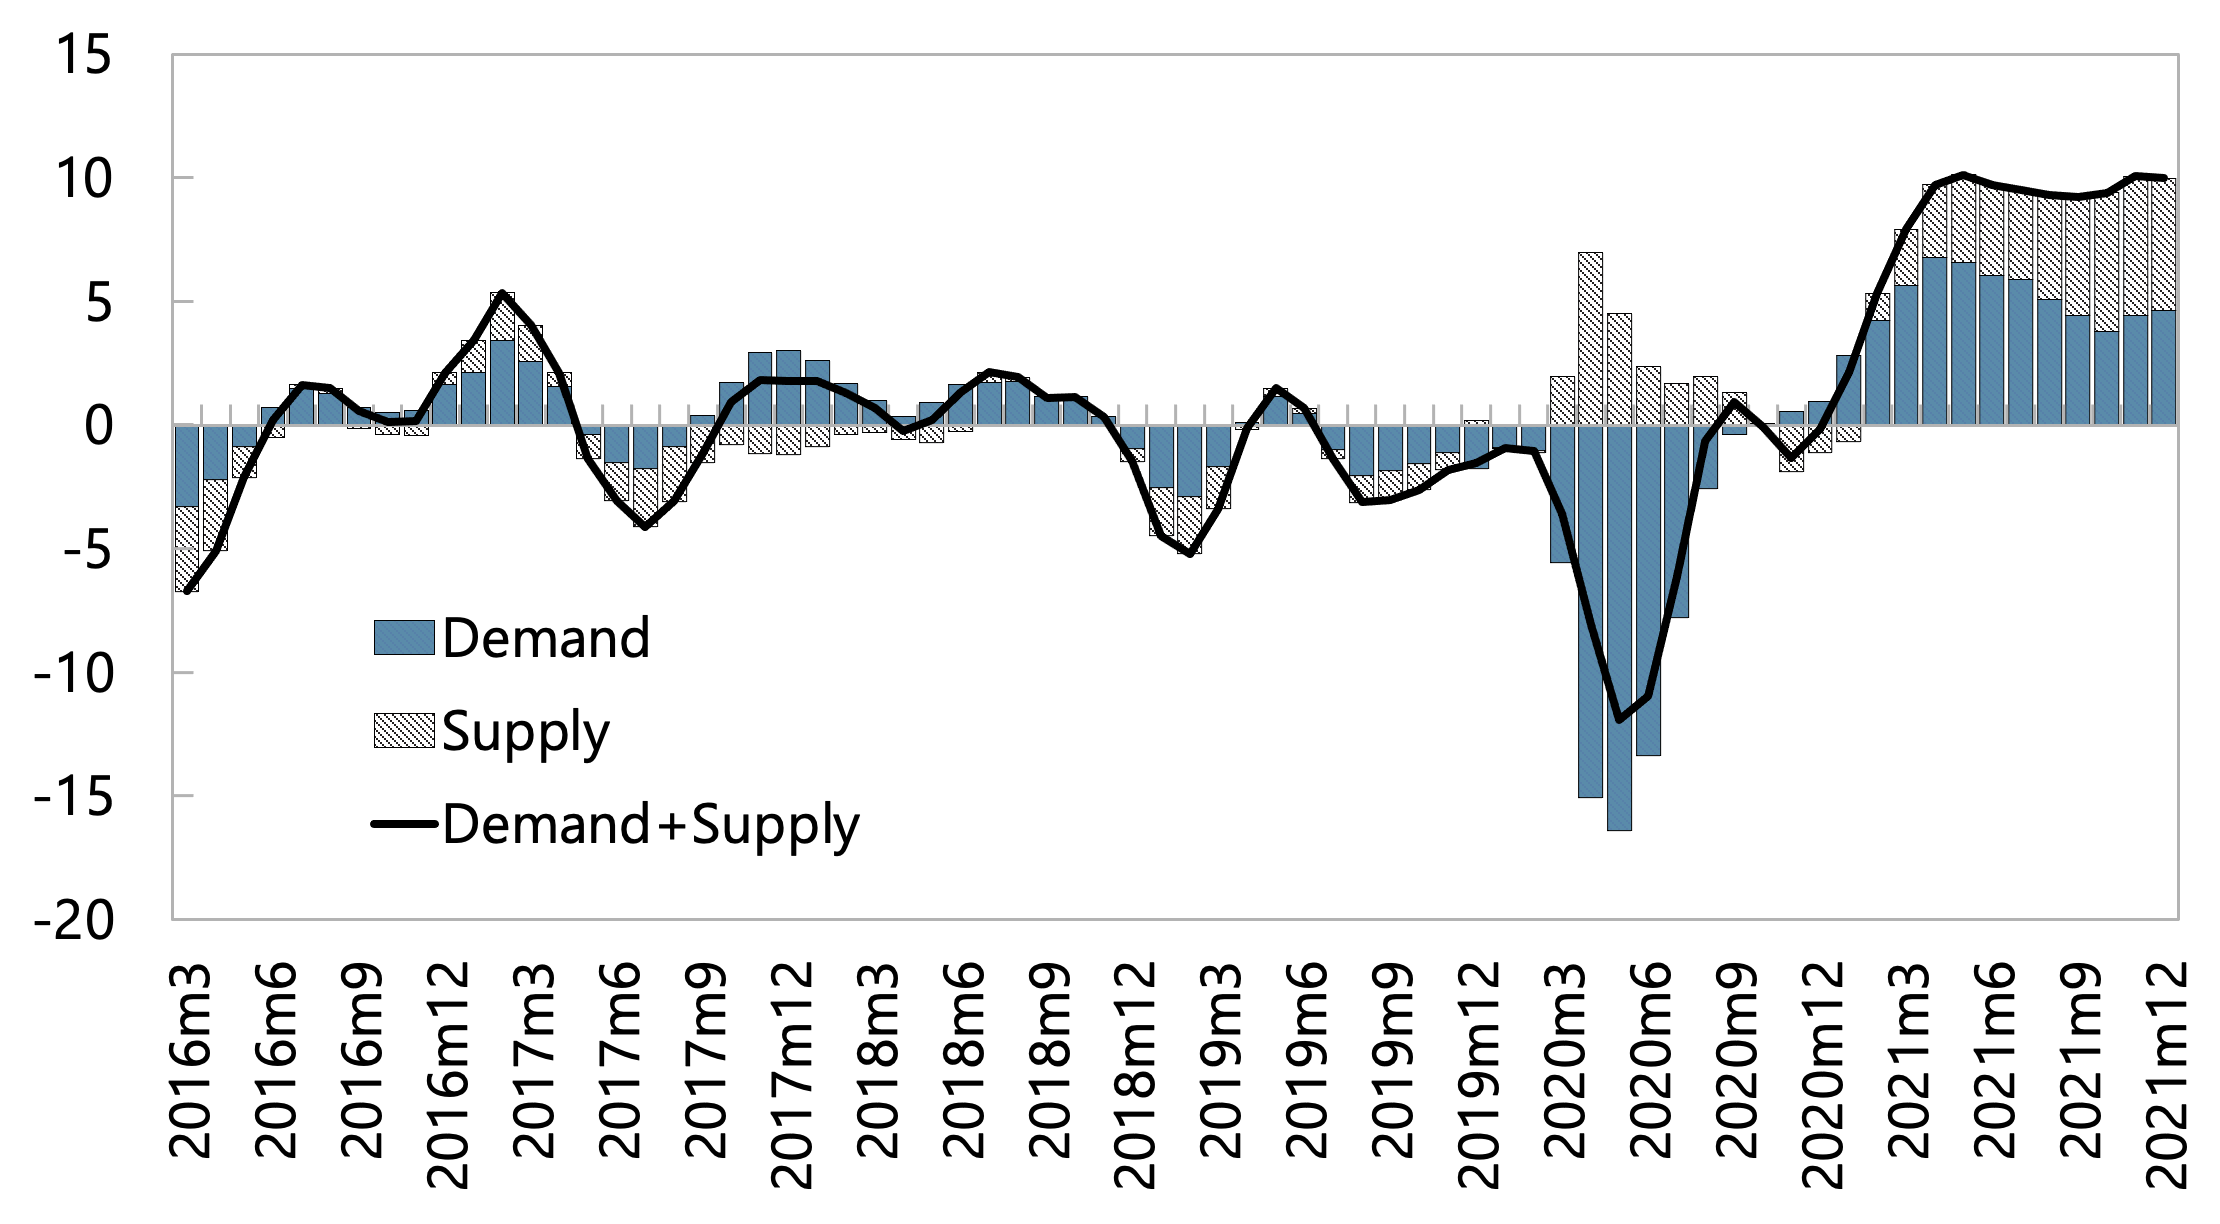 Supply disruptions added to inflation undermined the recovery in 2021 3